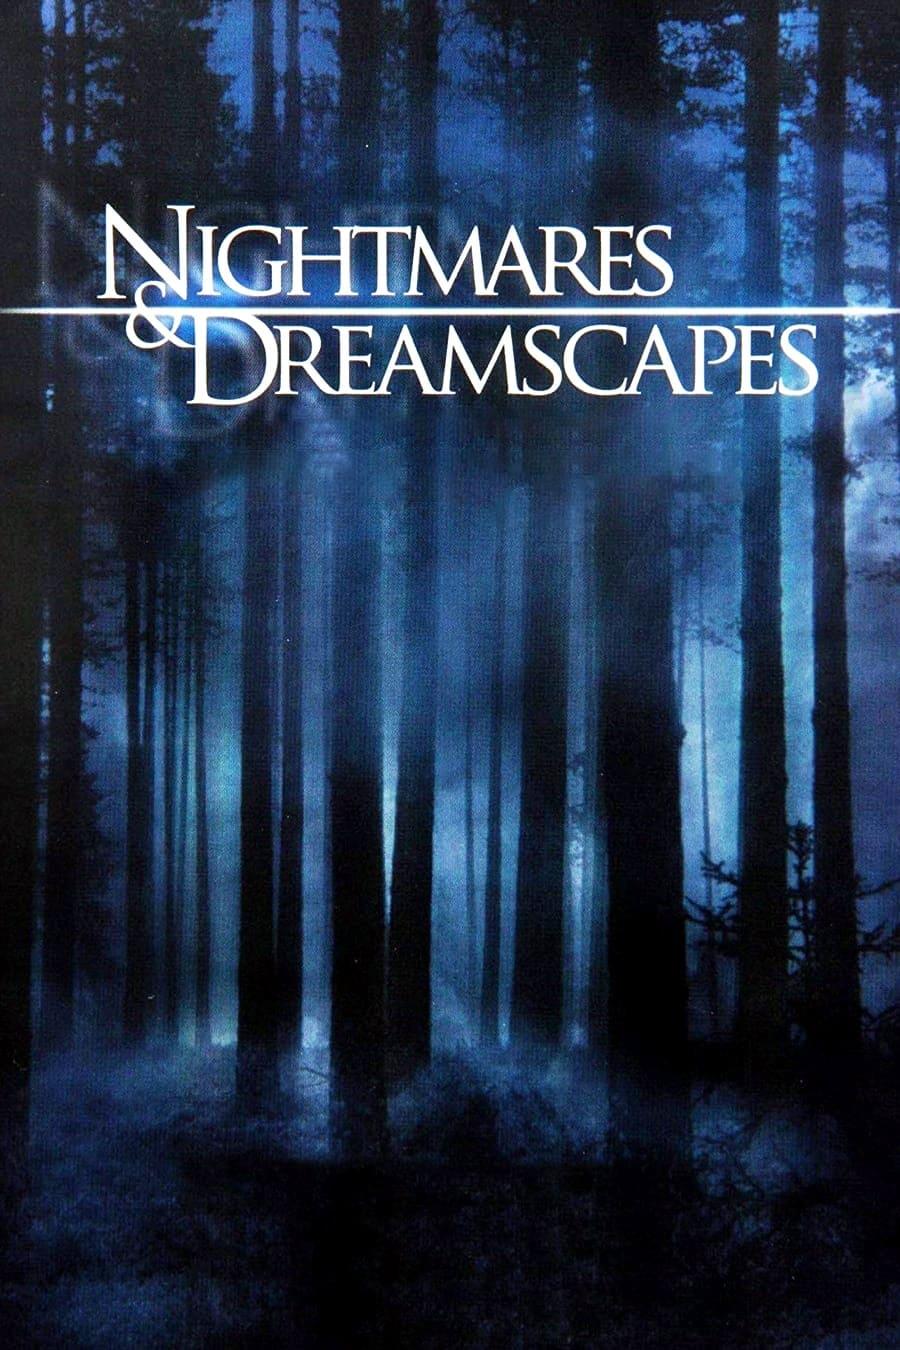 Nightmares & Dreamscapes: From the Stories of Stephen King poster